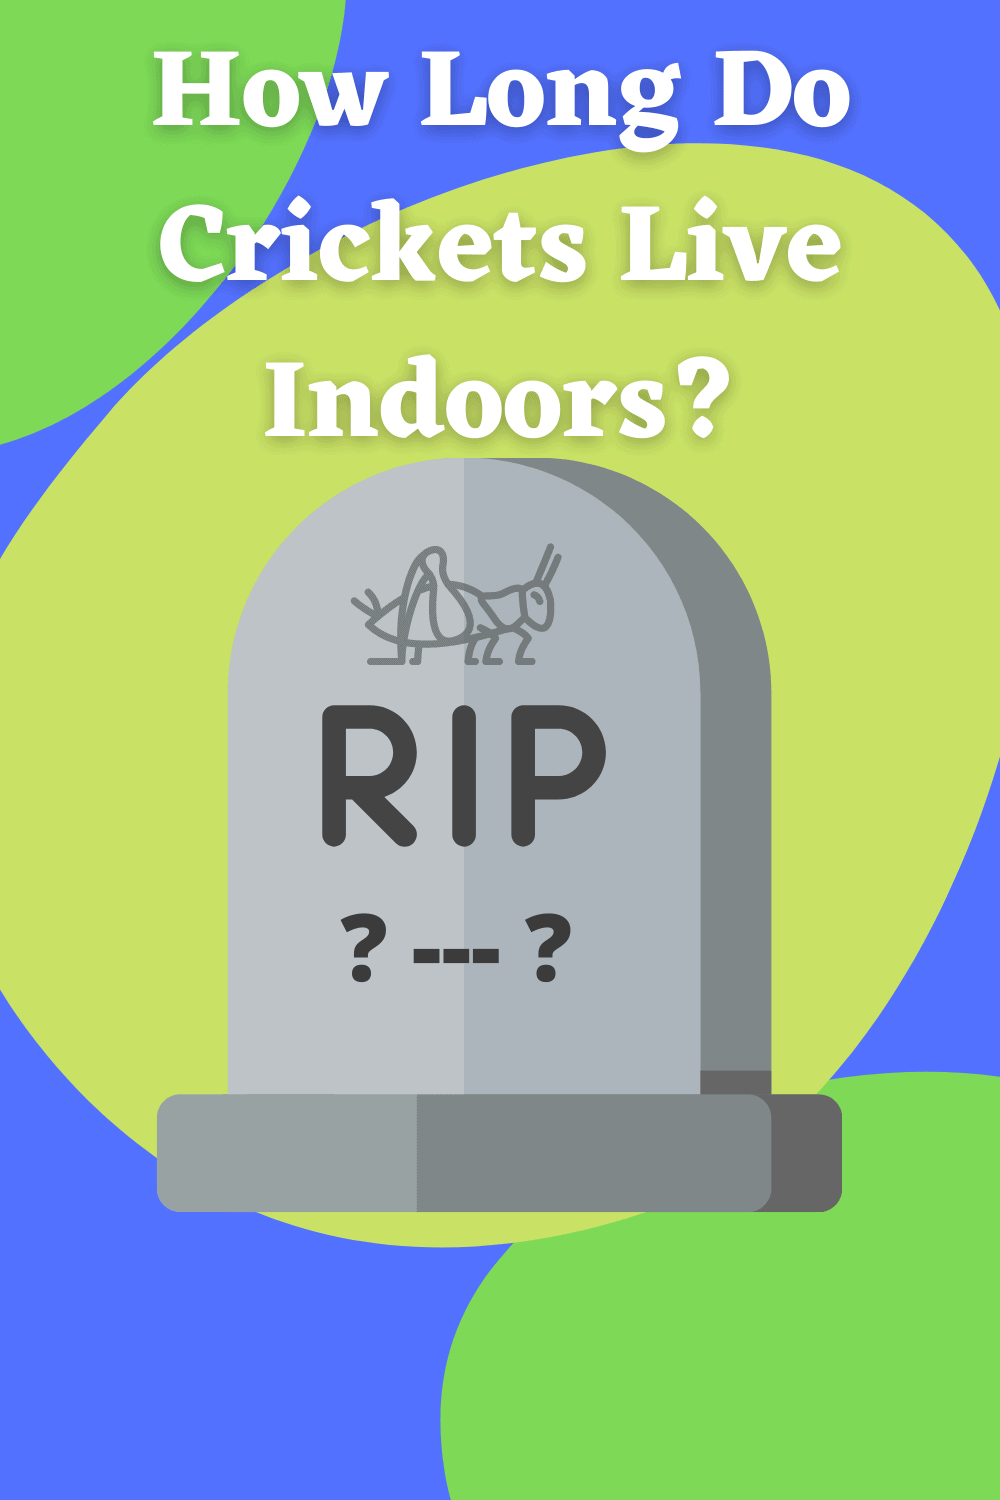 How Long Do Crickets Live Indoors